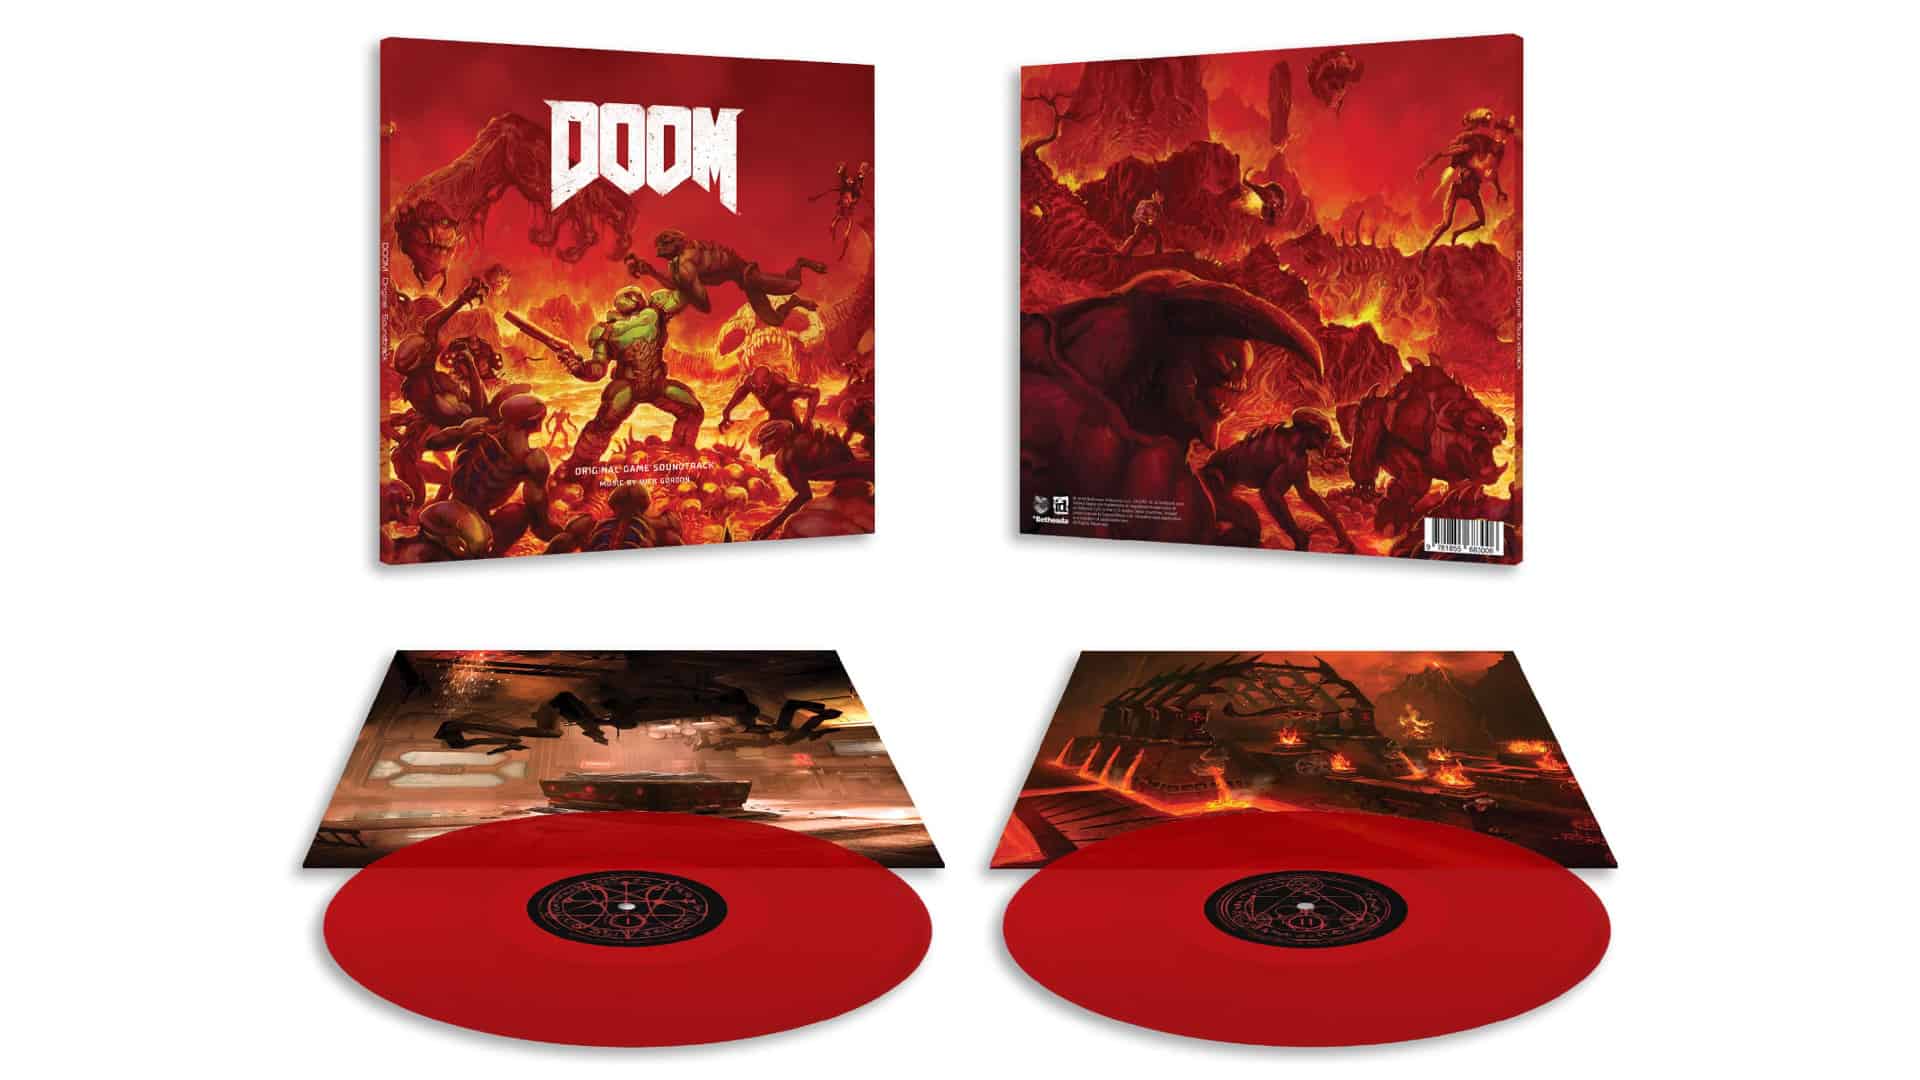 DOOM soundtrack is getting re-released on Vinyl and CD